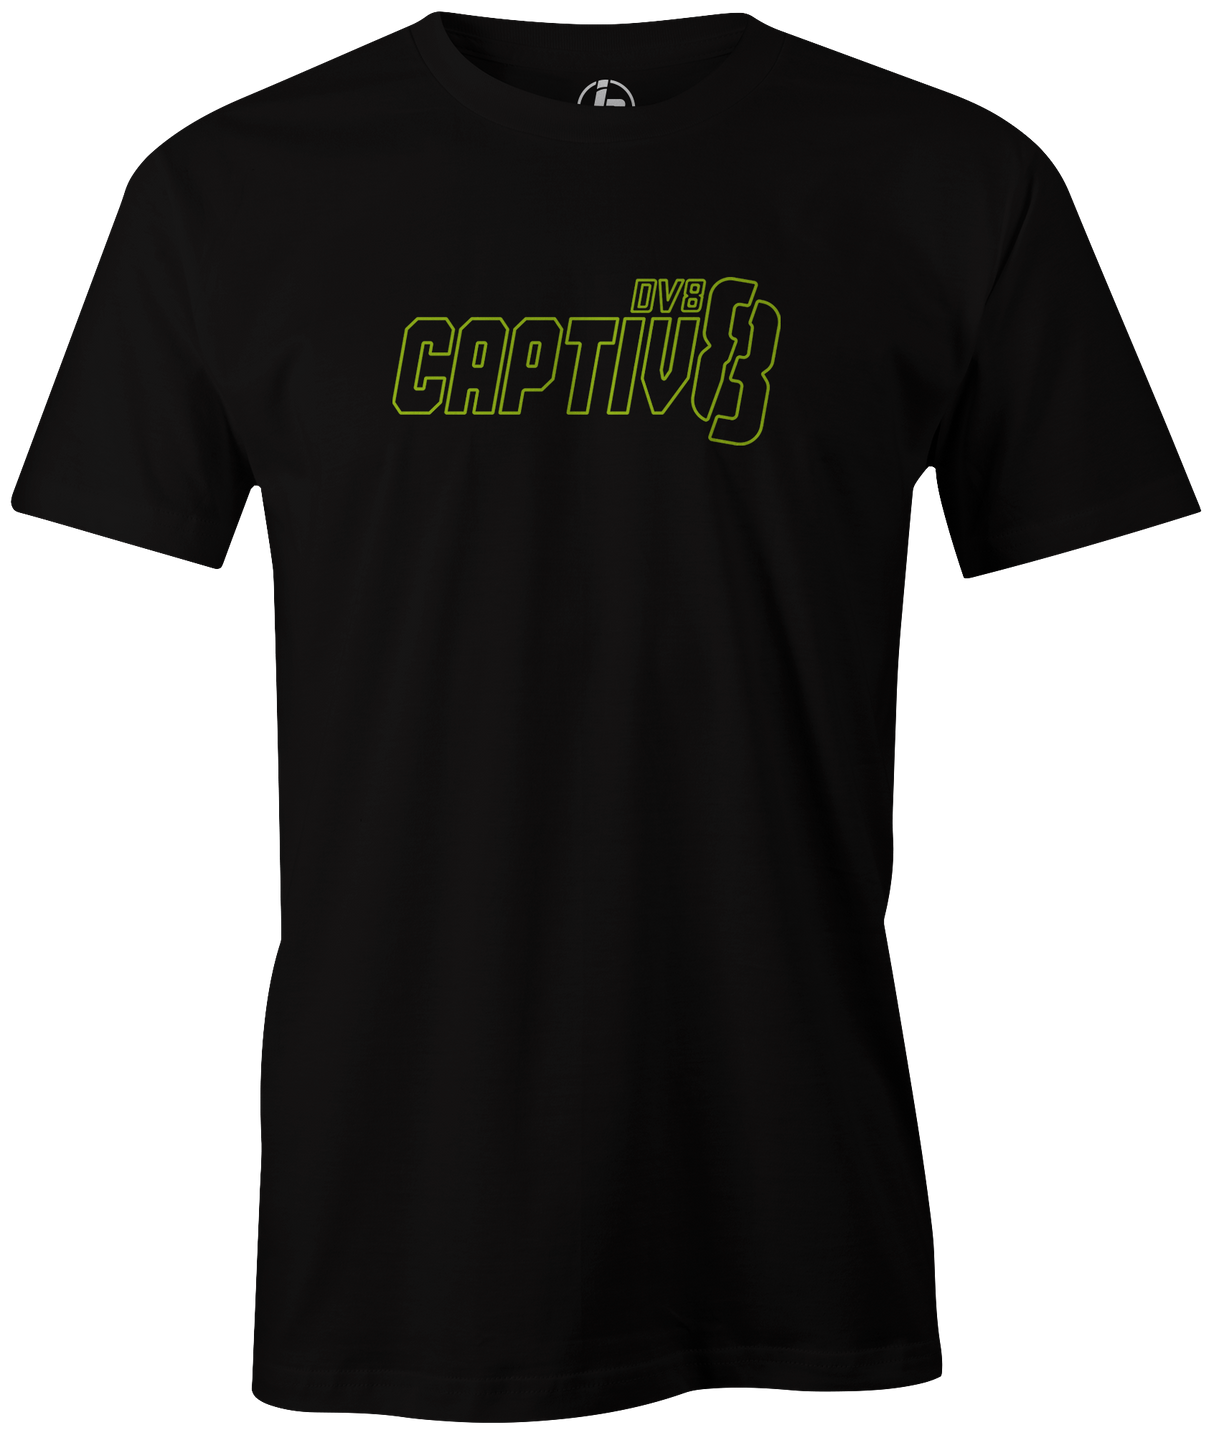 DV8 Bowling new Captiv8 logo stylish t-shirt available in black and Emerald Green. #TonightWeBowl #DV8Bowling Dv8/Brunswick bowling league shirts on sale discounted gifts for bowlers. Bowling party apparel. Original bowling tees. throwback big b legends legendary tonight we bowl damn good bowling